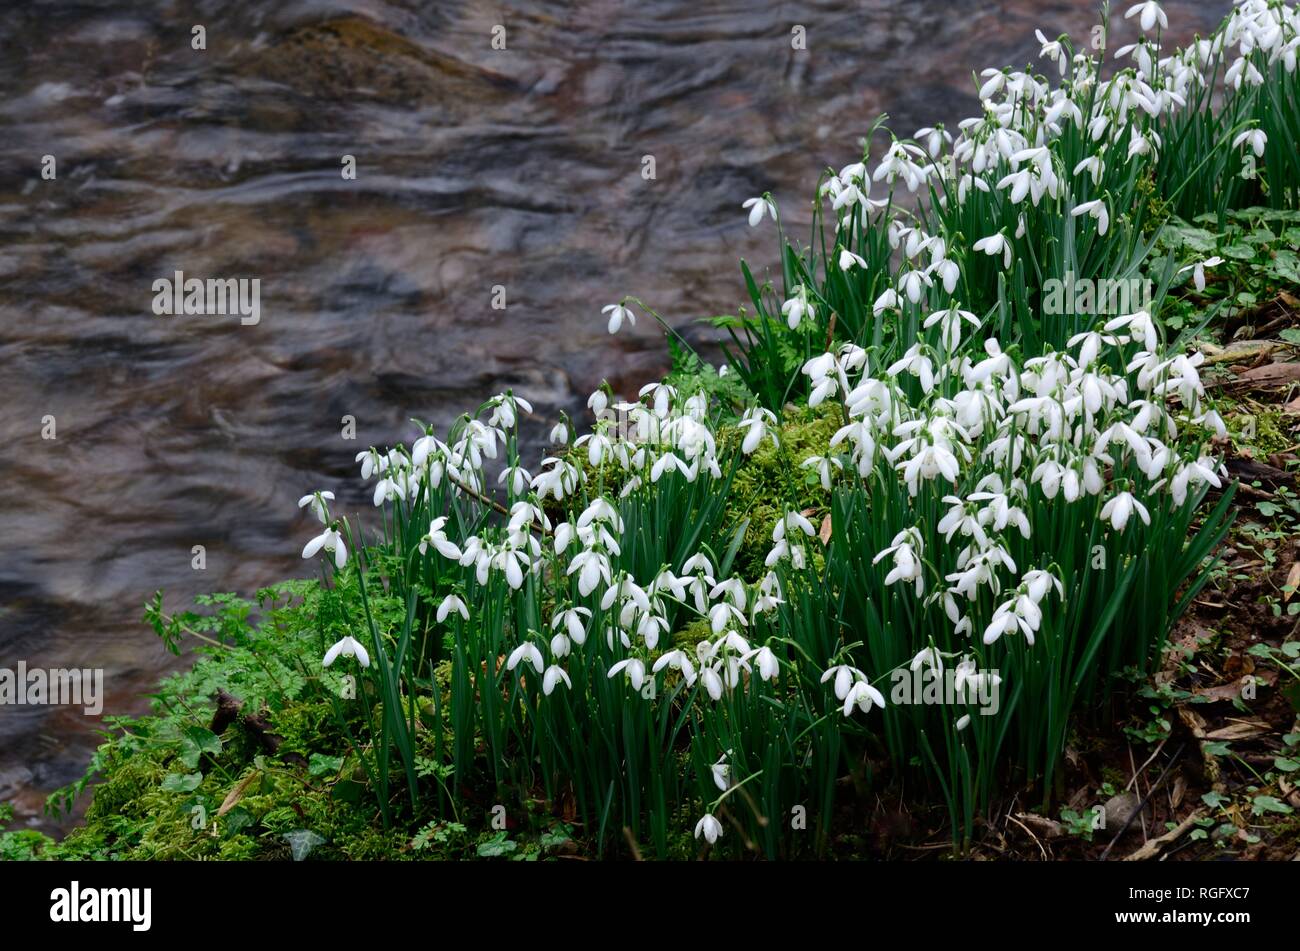 Snowdrops Galanthus nivalis growing on the bank of a stream river Carmarthenshire Wales UK Stock Photo